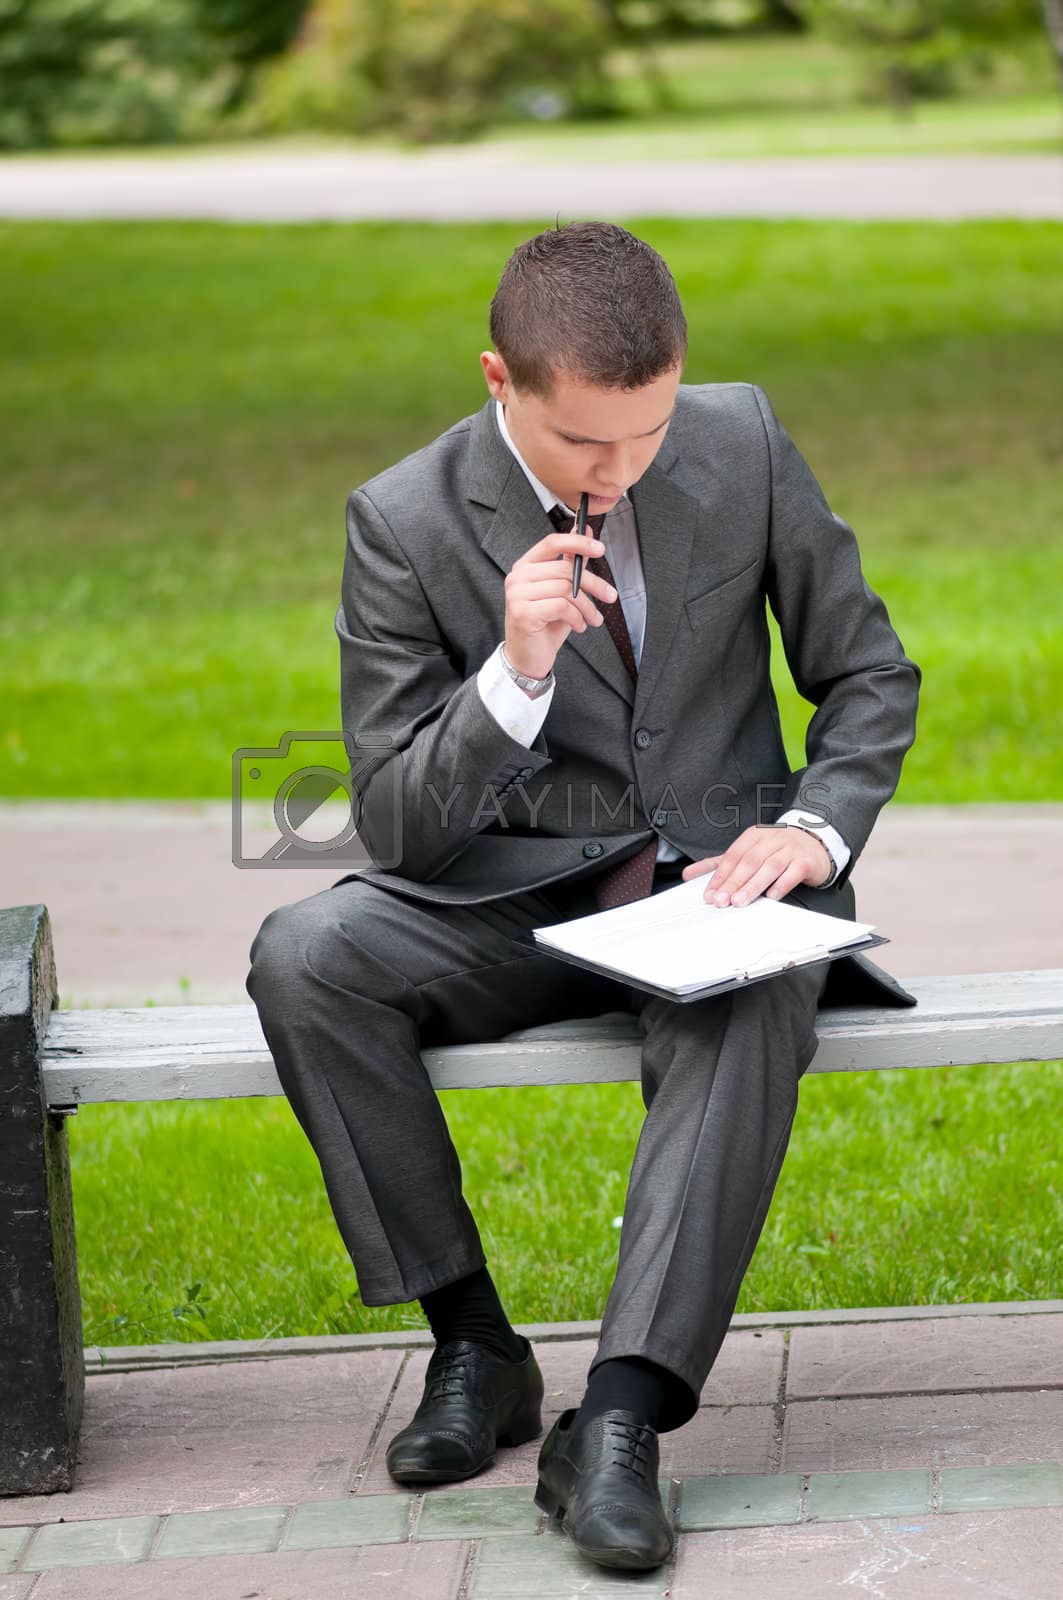 Royalty free image of business man working with papers at park. Student by markin